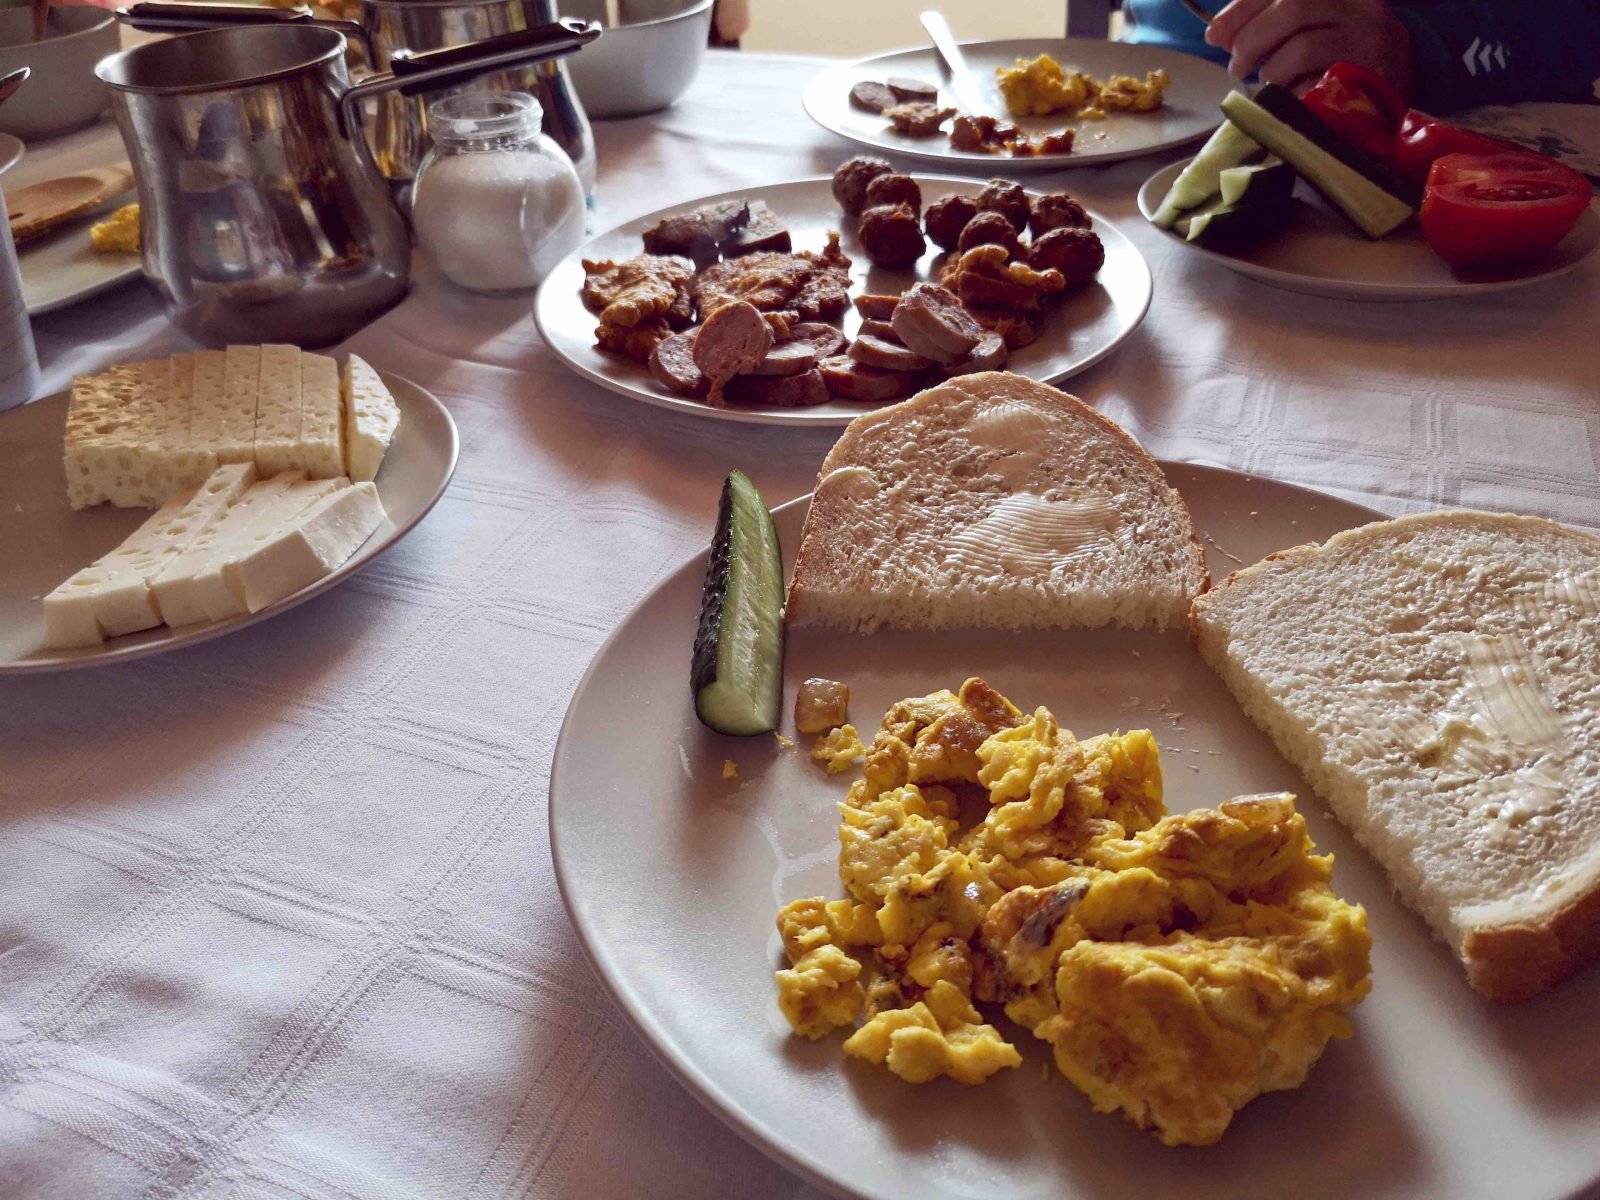 A Romanian breakfast of homemade cheese, homemade bread and butter and scrambled eggs with pig fat.